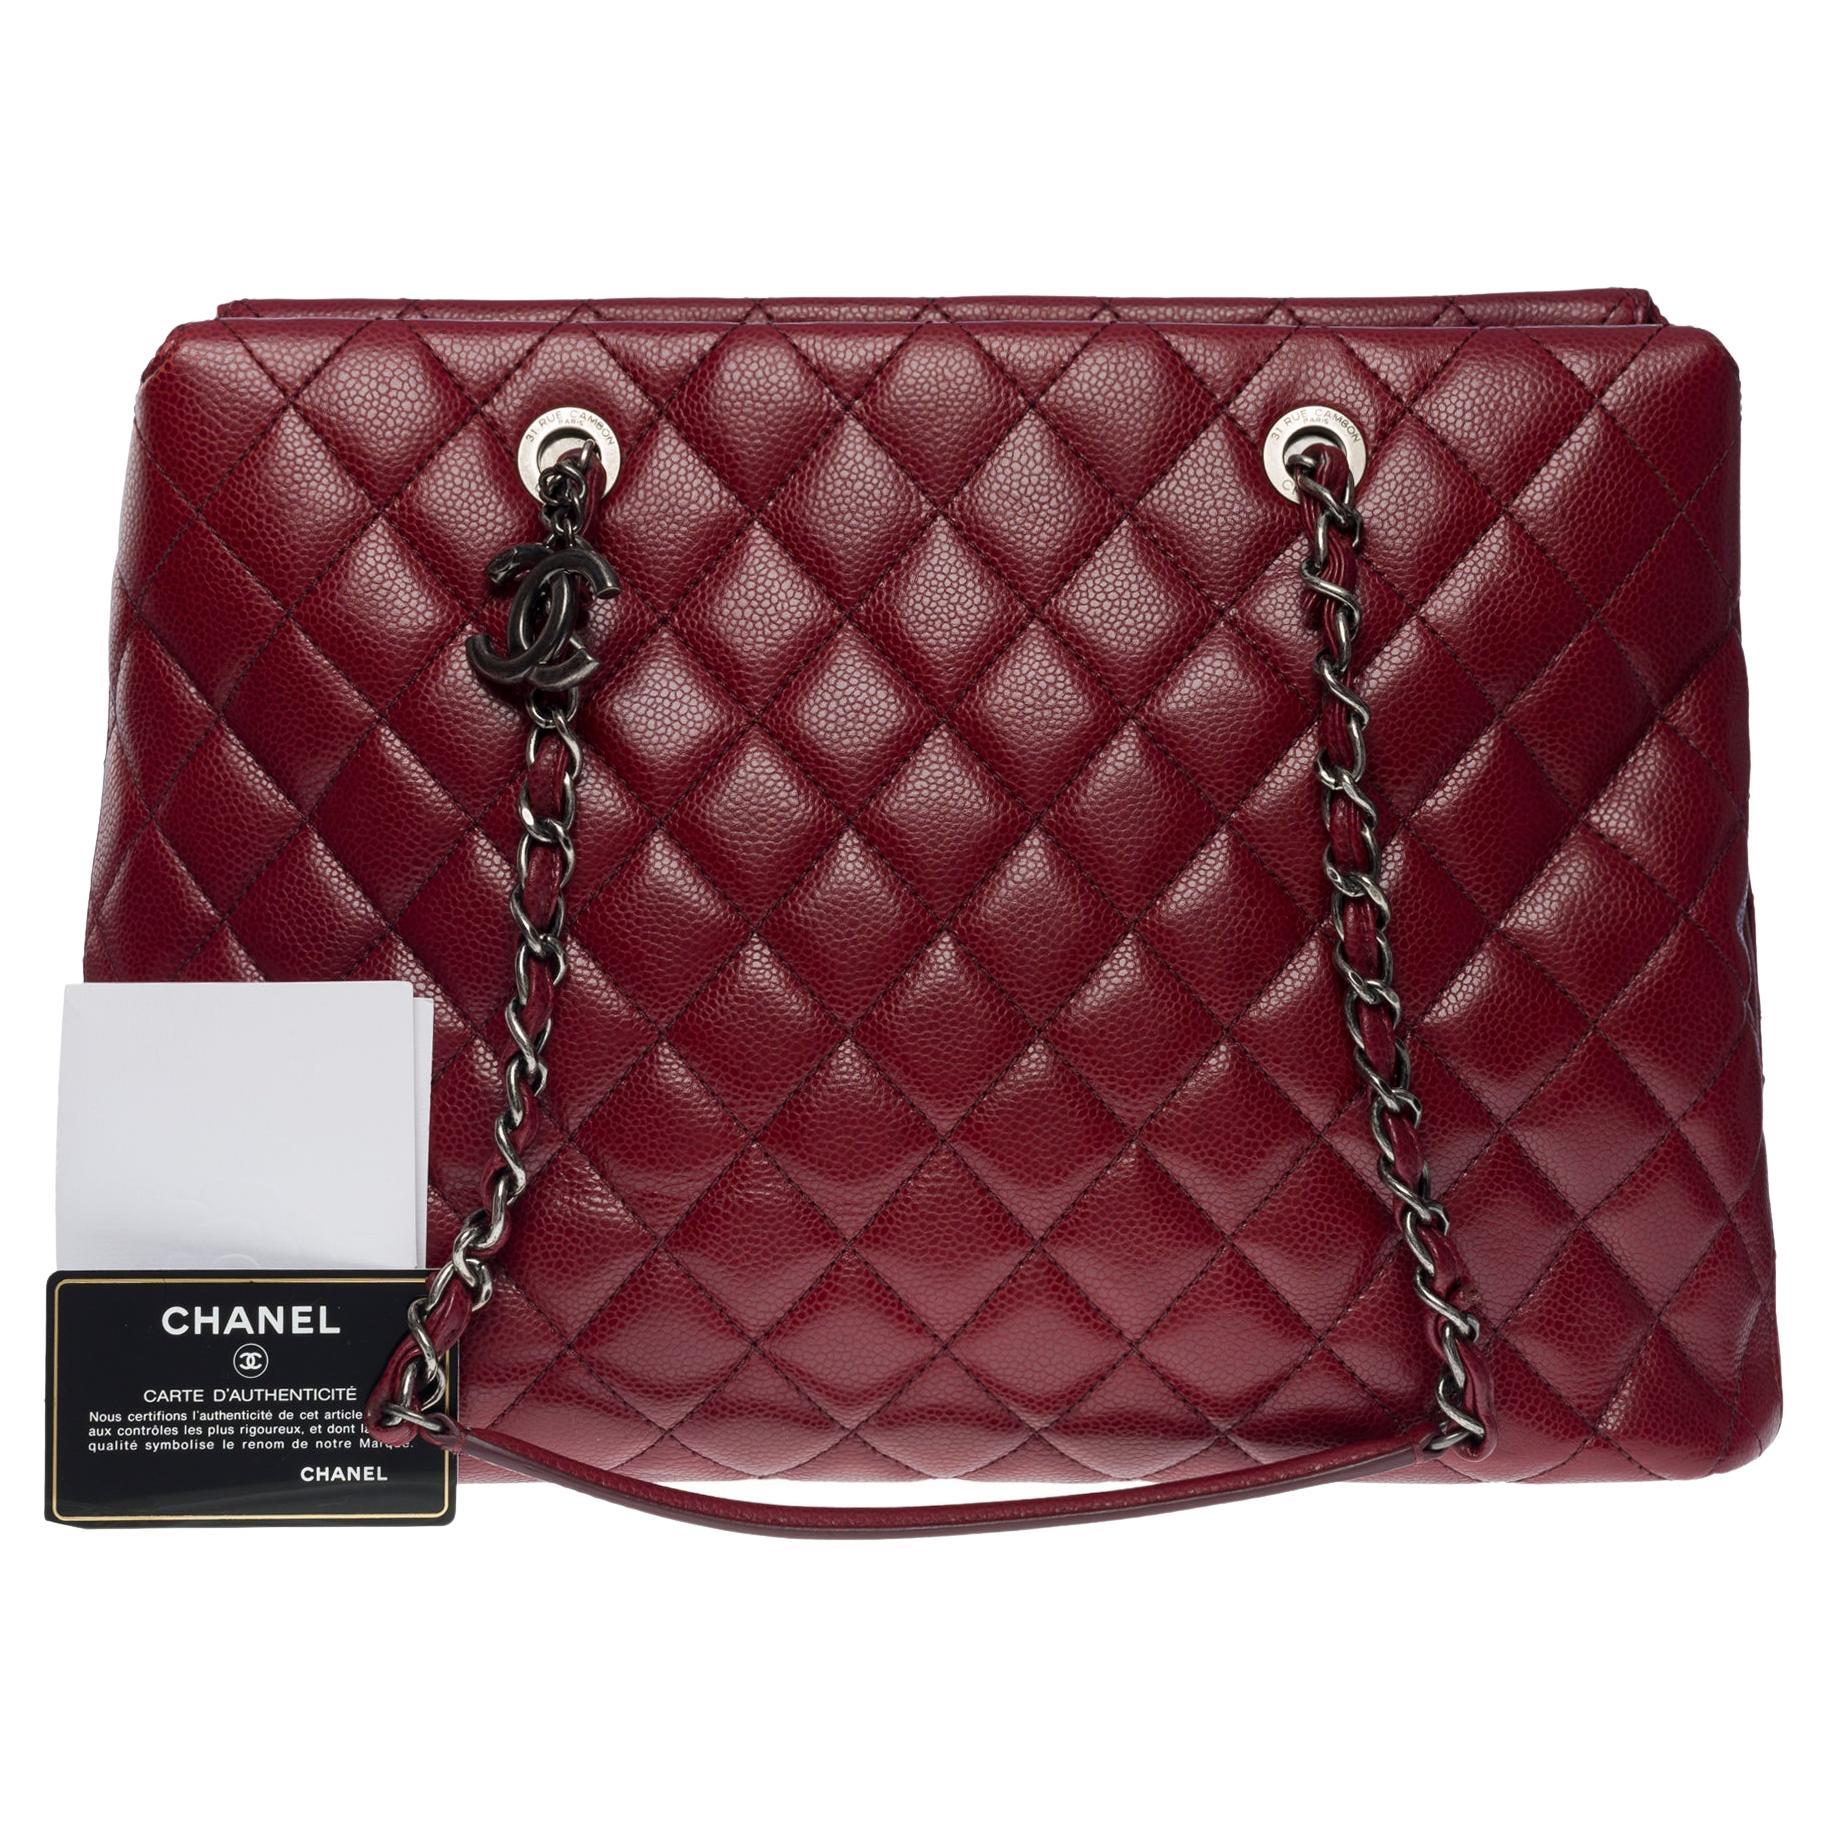 Amazing Chanel Shopping Tote bag in Burgundy Caviar quilted leather, SHW